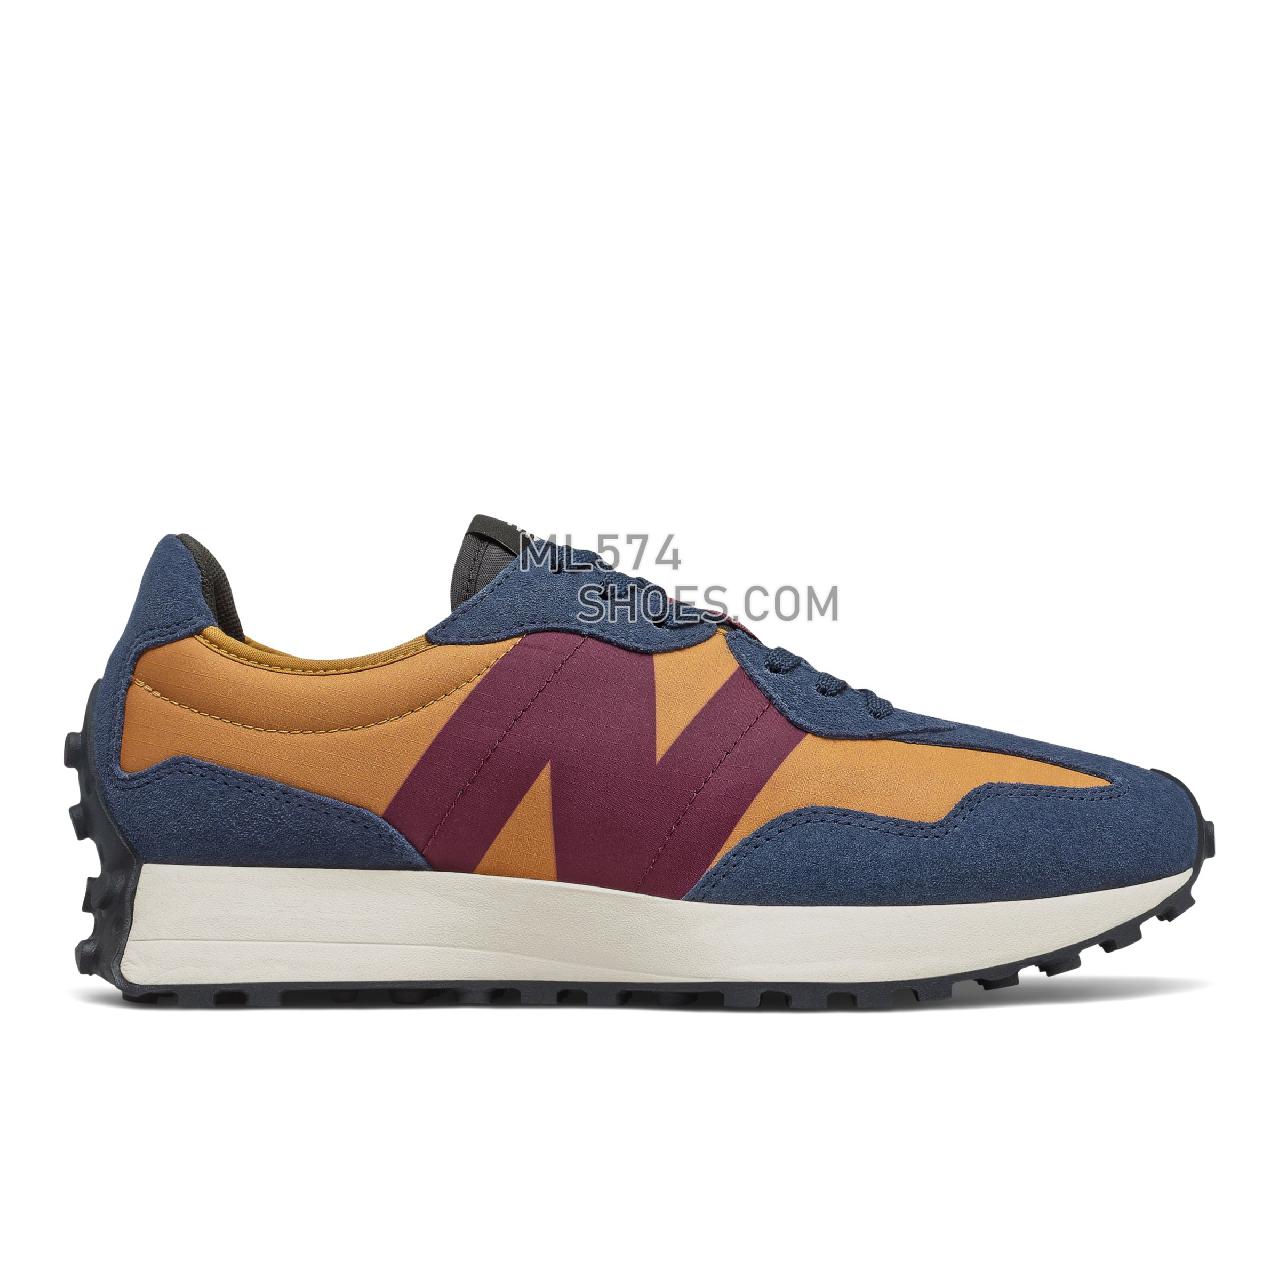 New Balance 327 - Men's Sport Style Sneakers - Natural Indigo with Faded Workwear - MS327TA